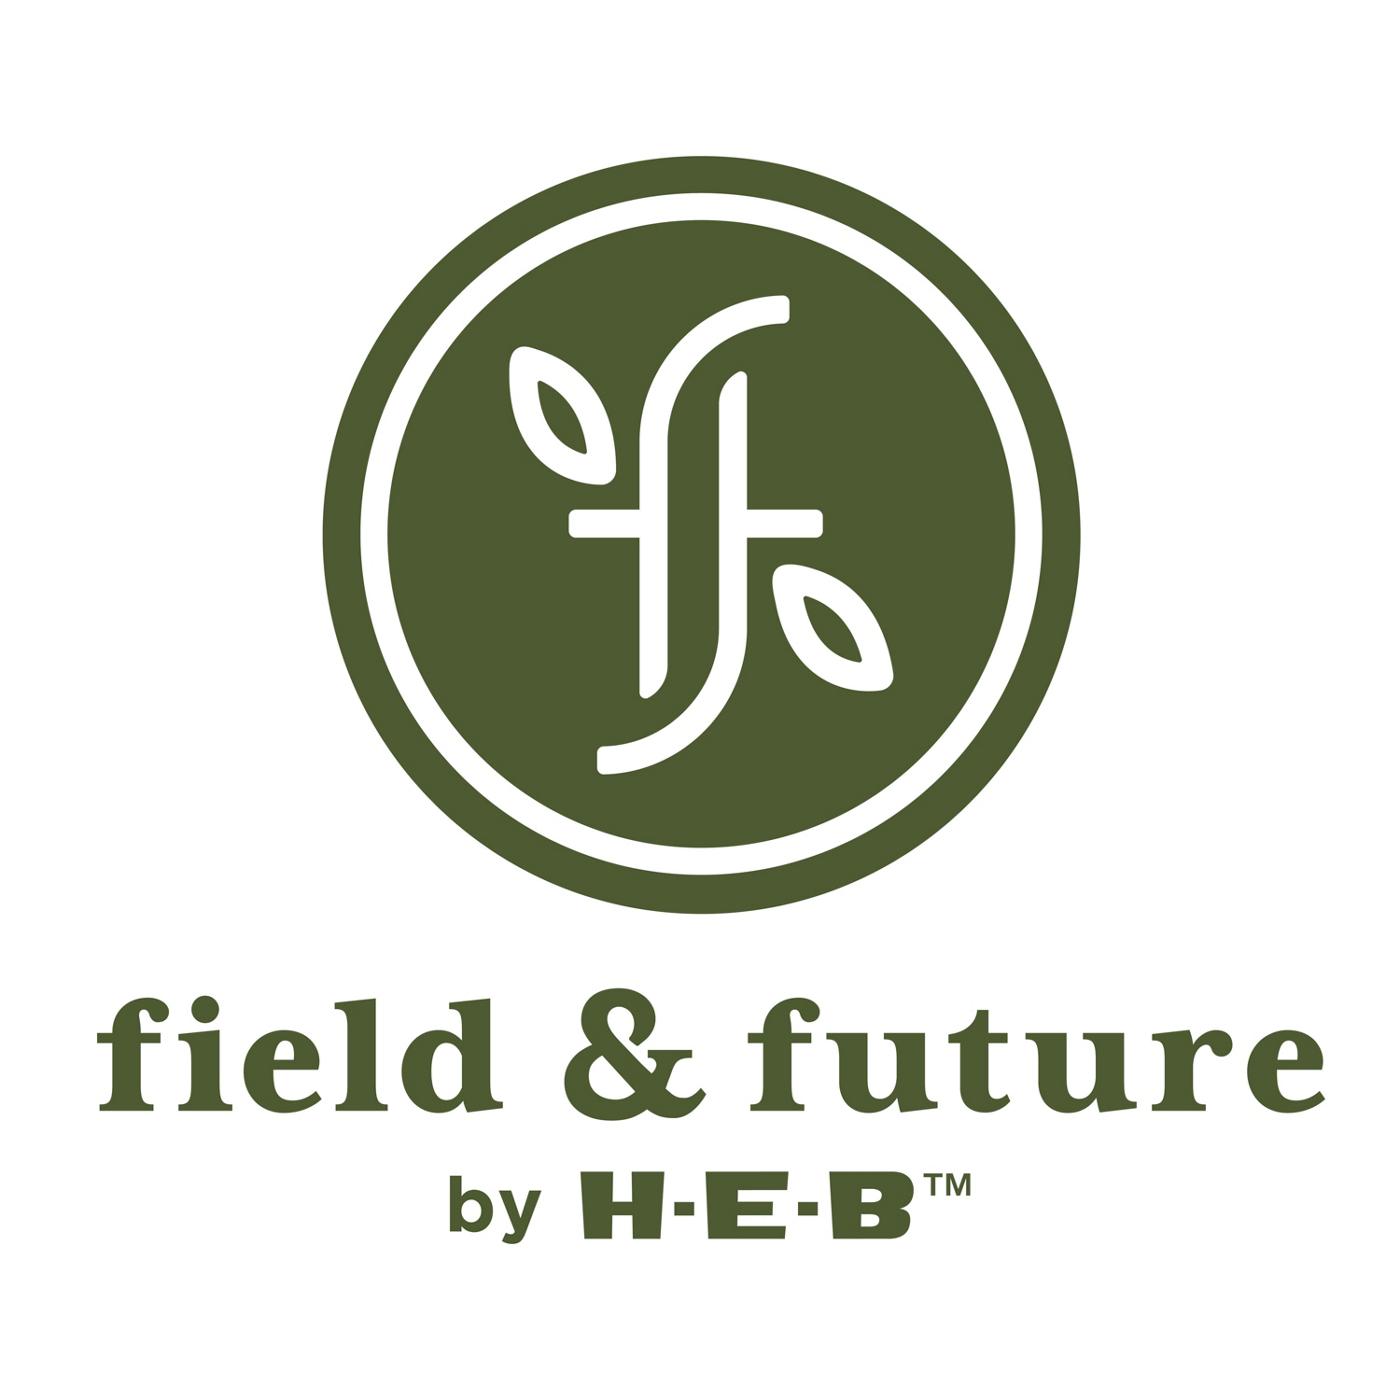 Field & Future by H-E-B Dishwashing Liquid - Hill Country Laurel; image 3 of 4